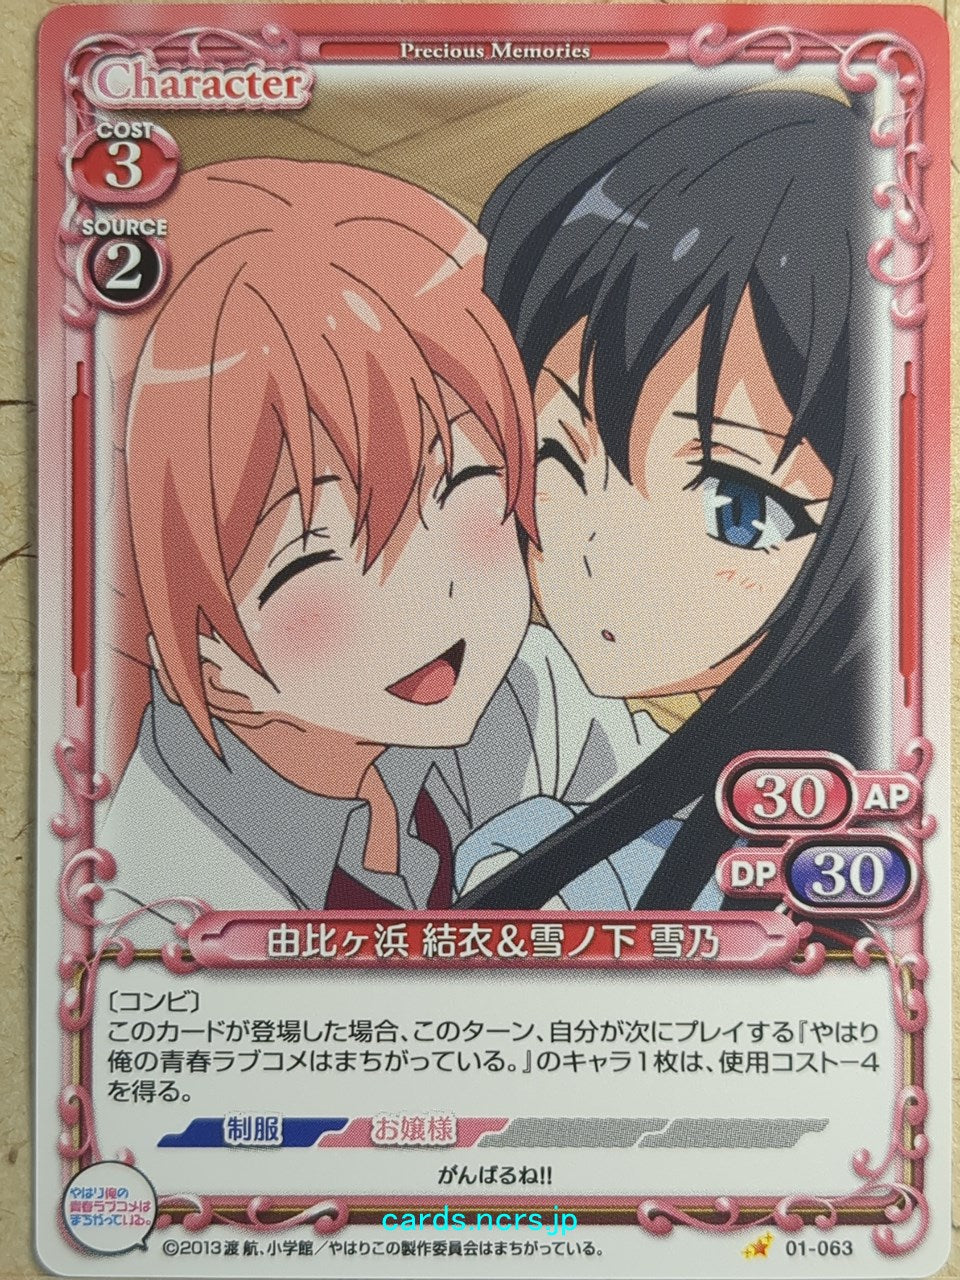 Precious Memories My Youth Romantic Comedy Is Wrong, as I Expected -Yui Yuigahama-   Trading Card PM/YAH-01-063